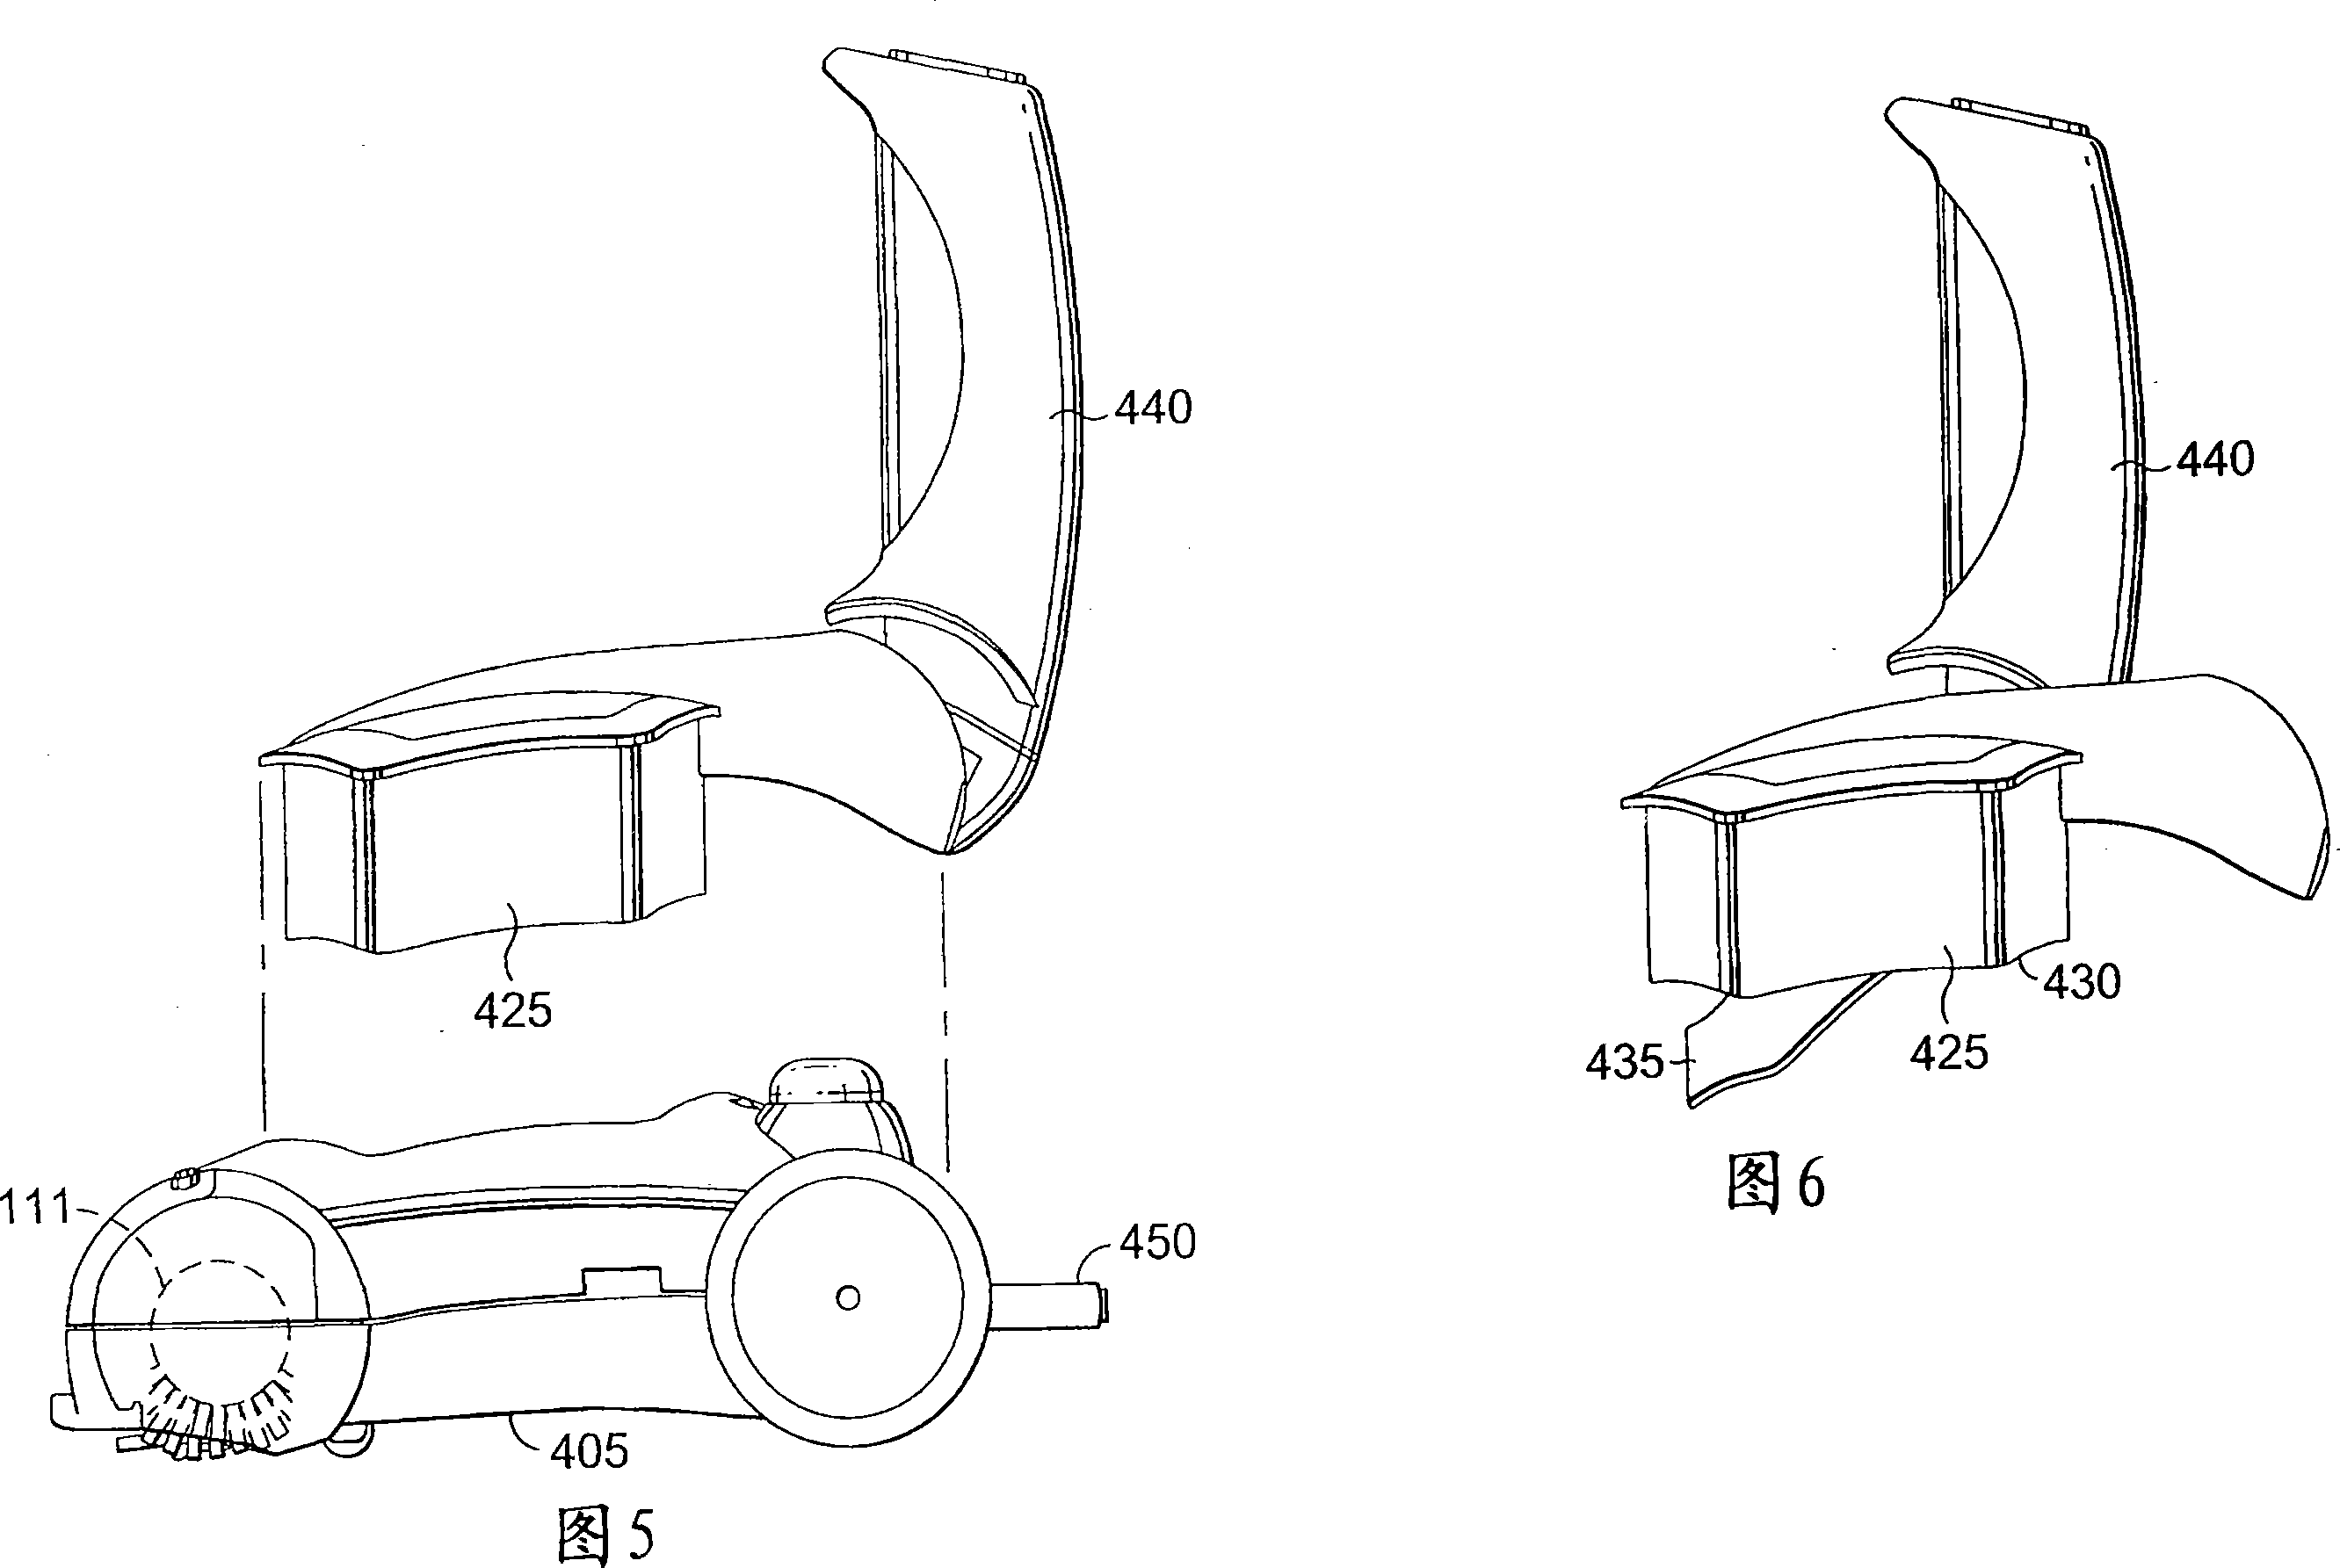 Surface cleaning apparatus with removable dust cup and dust removal door